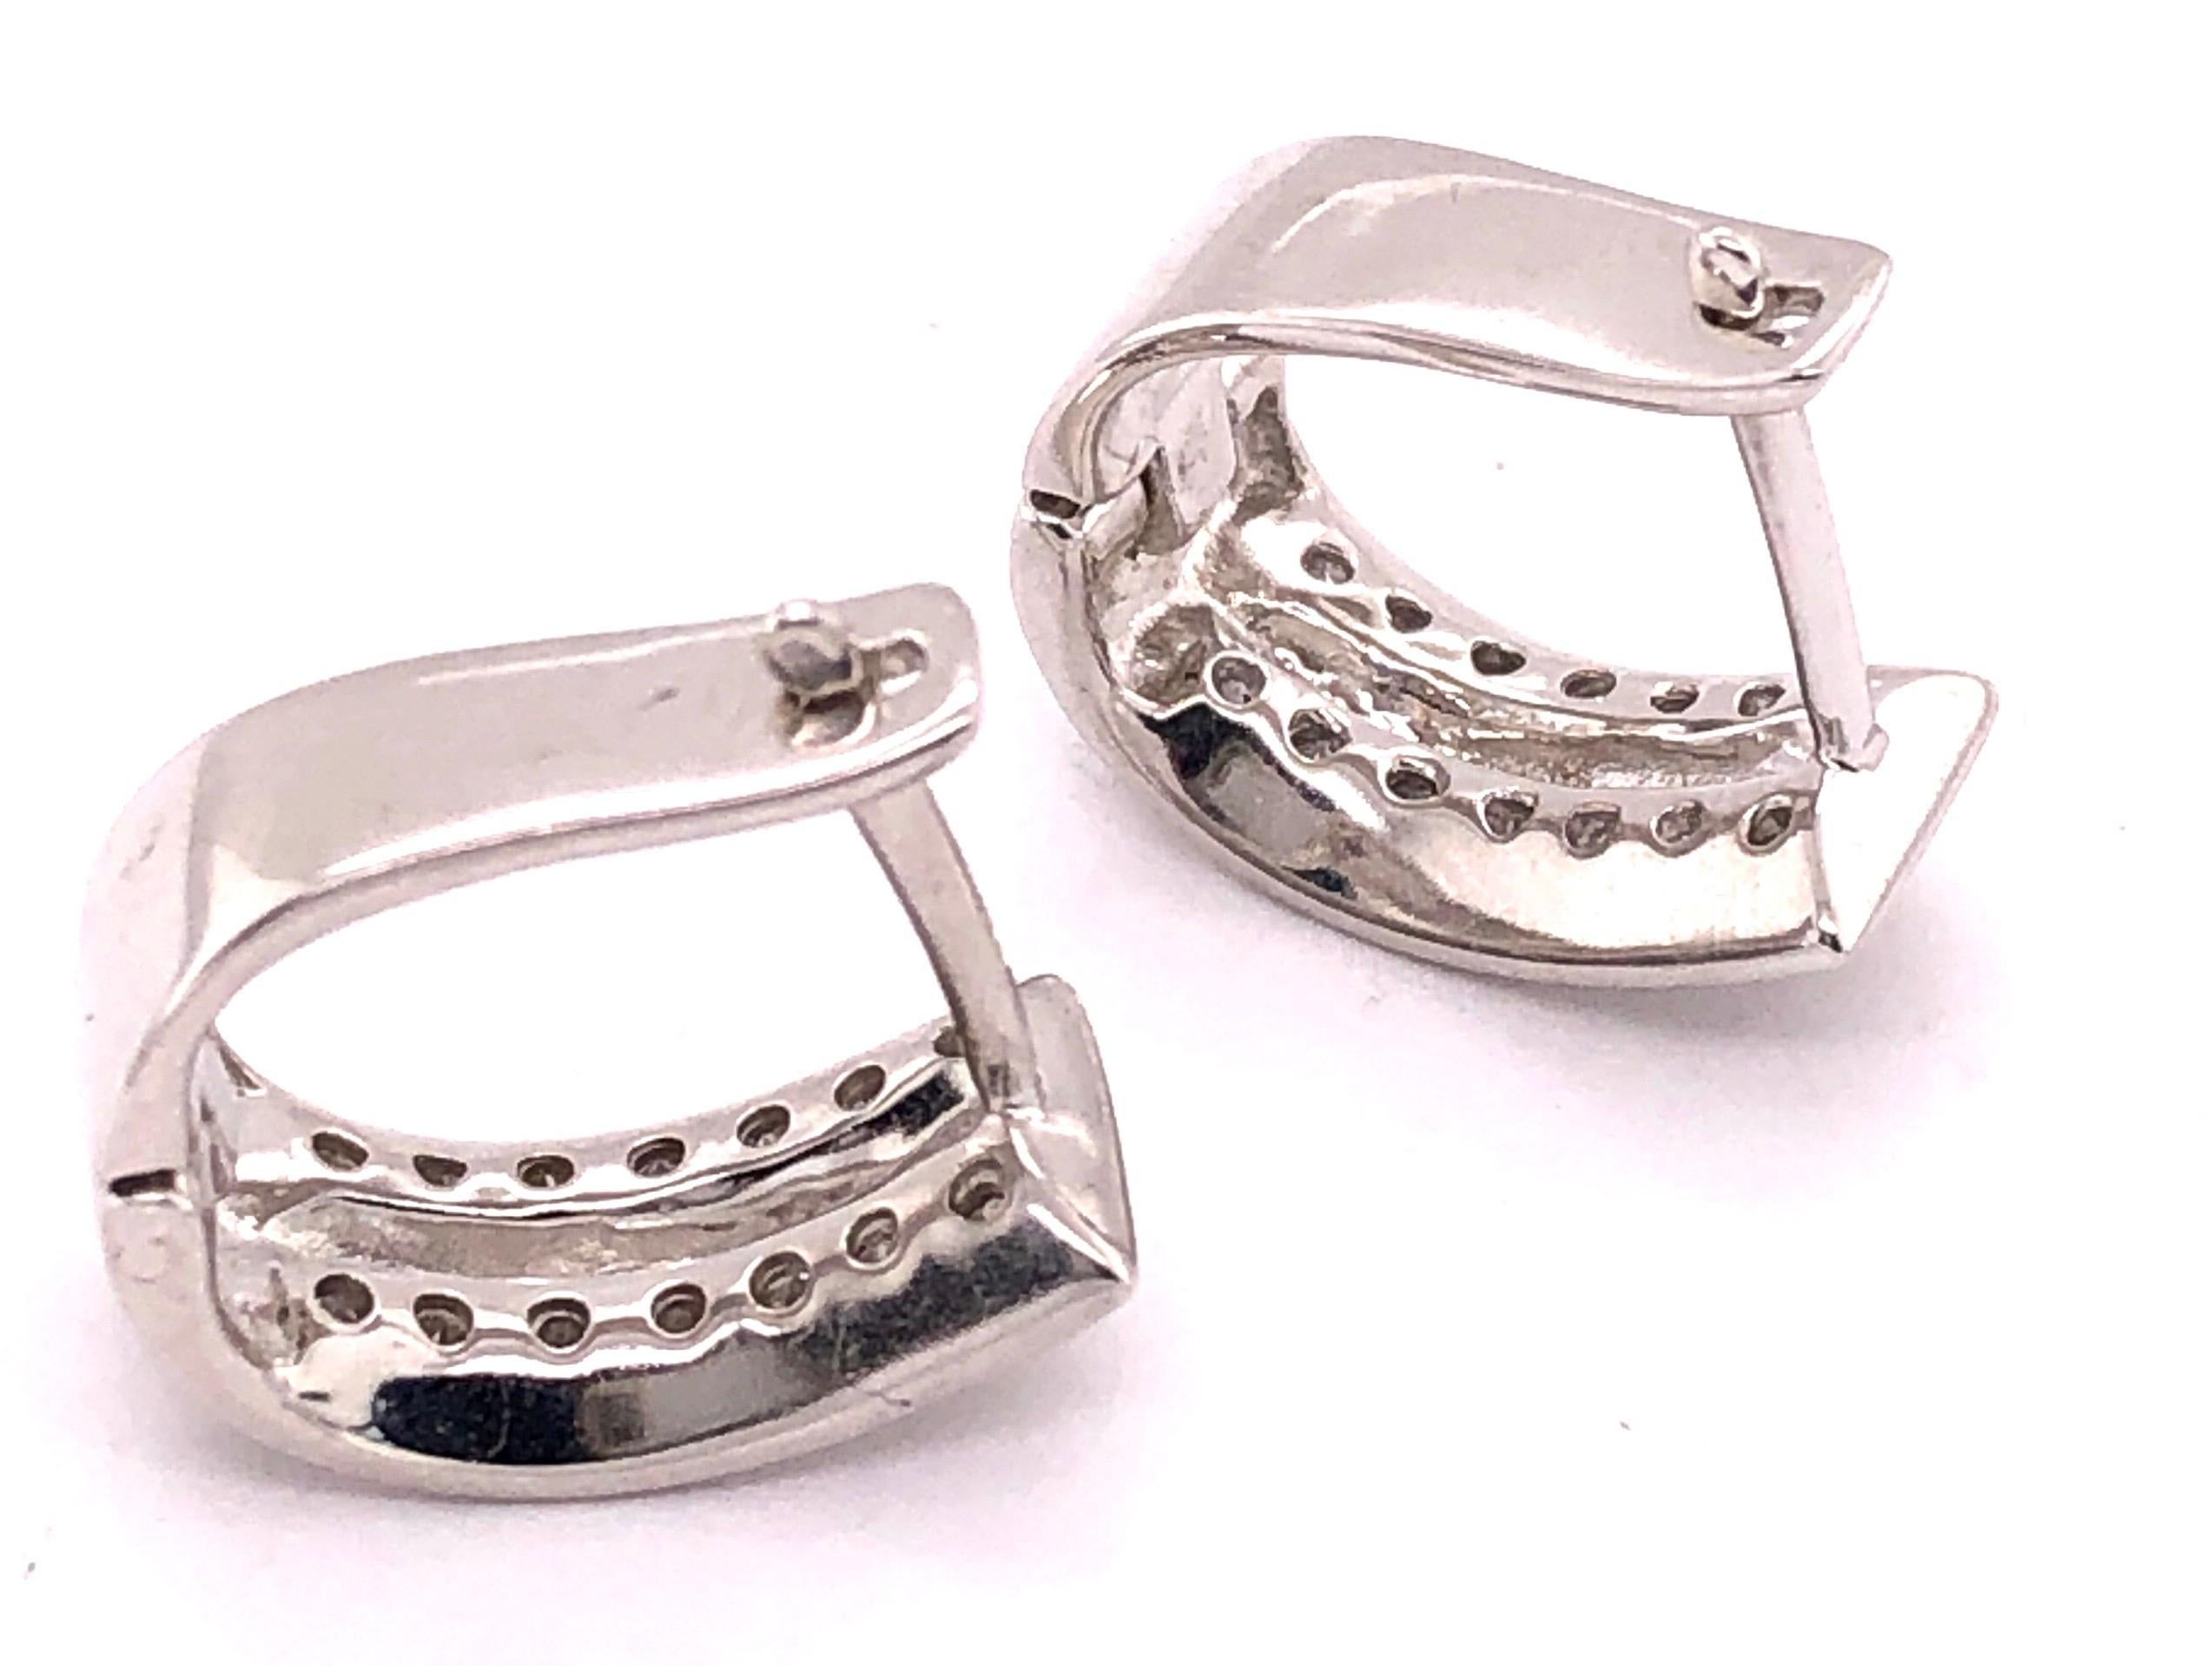 14 Karat White Gold Latch Back Earrings with 1.50 Total Diamond Weight For Sale 1